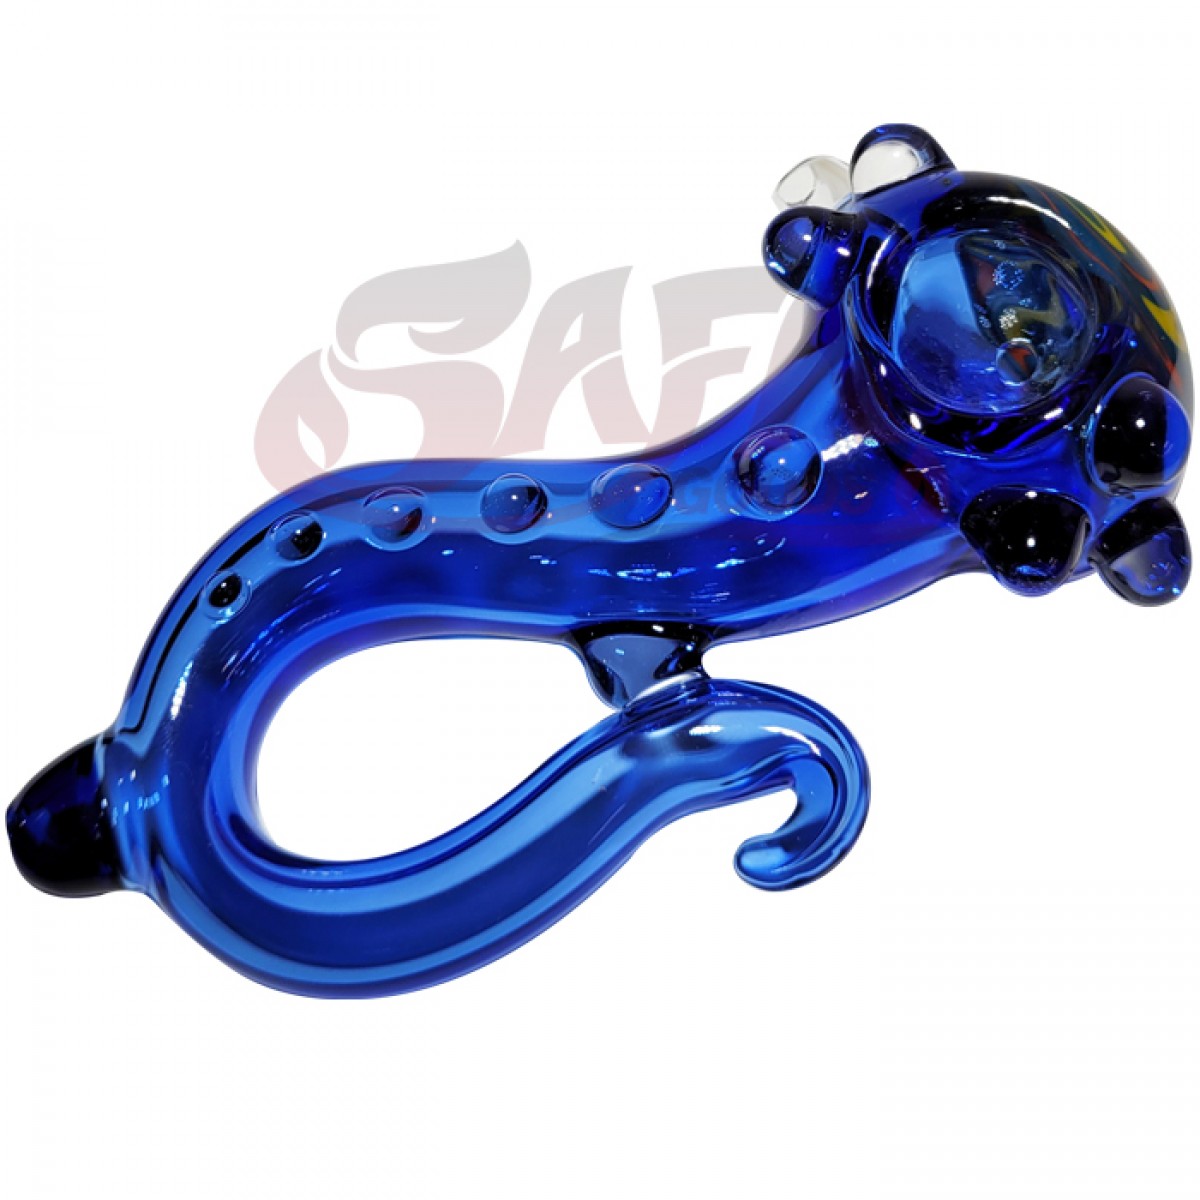 4" Tentacle Themed Hand Pipe